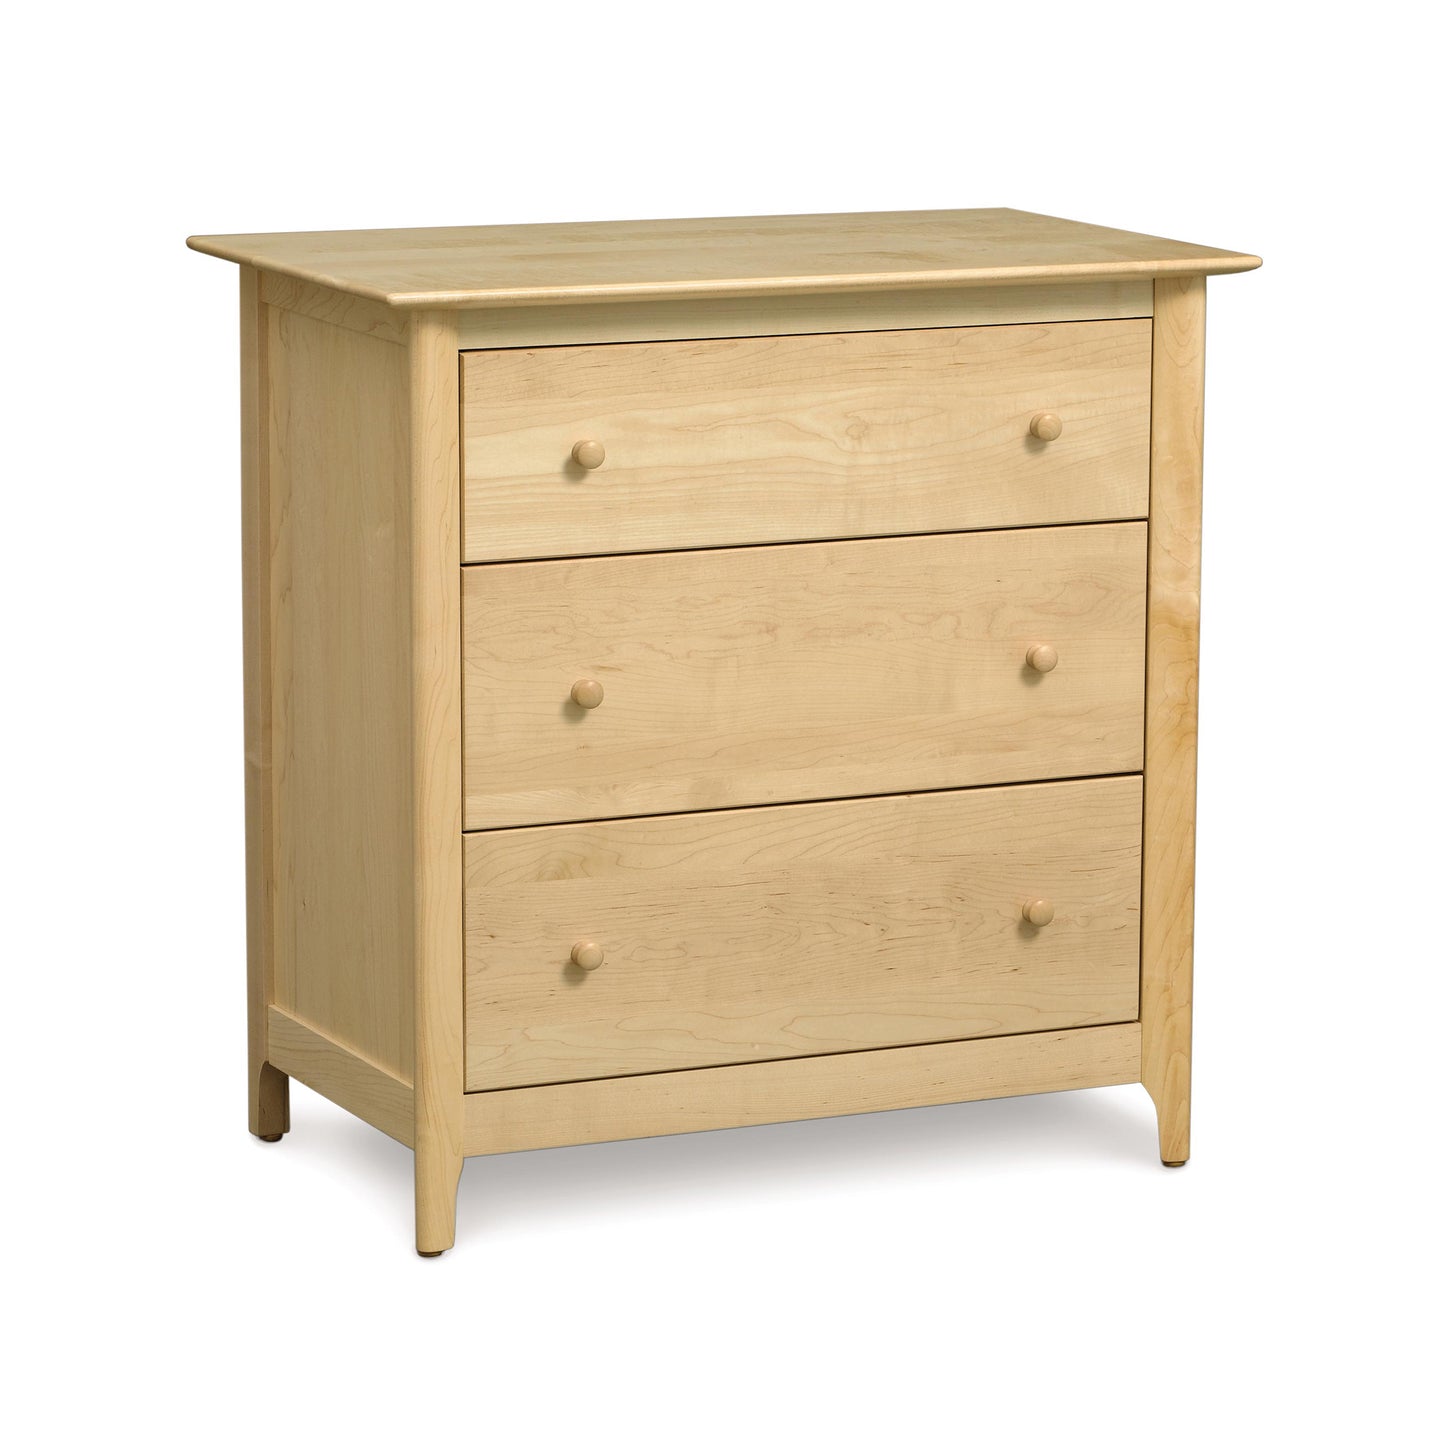 A Sarah 3-Drawer Chest by Copeland Furniture isolated on a white background.